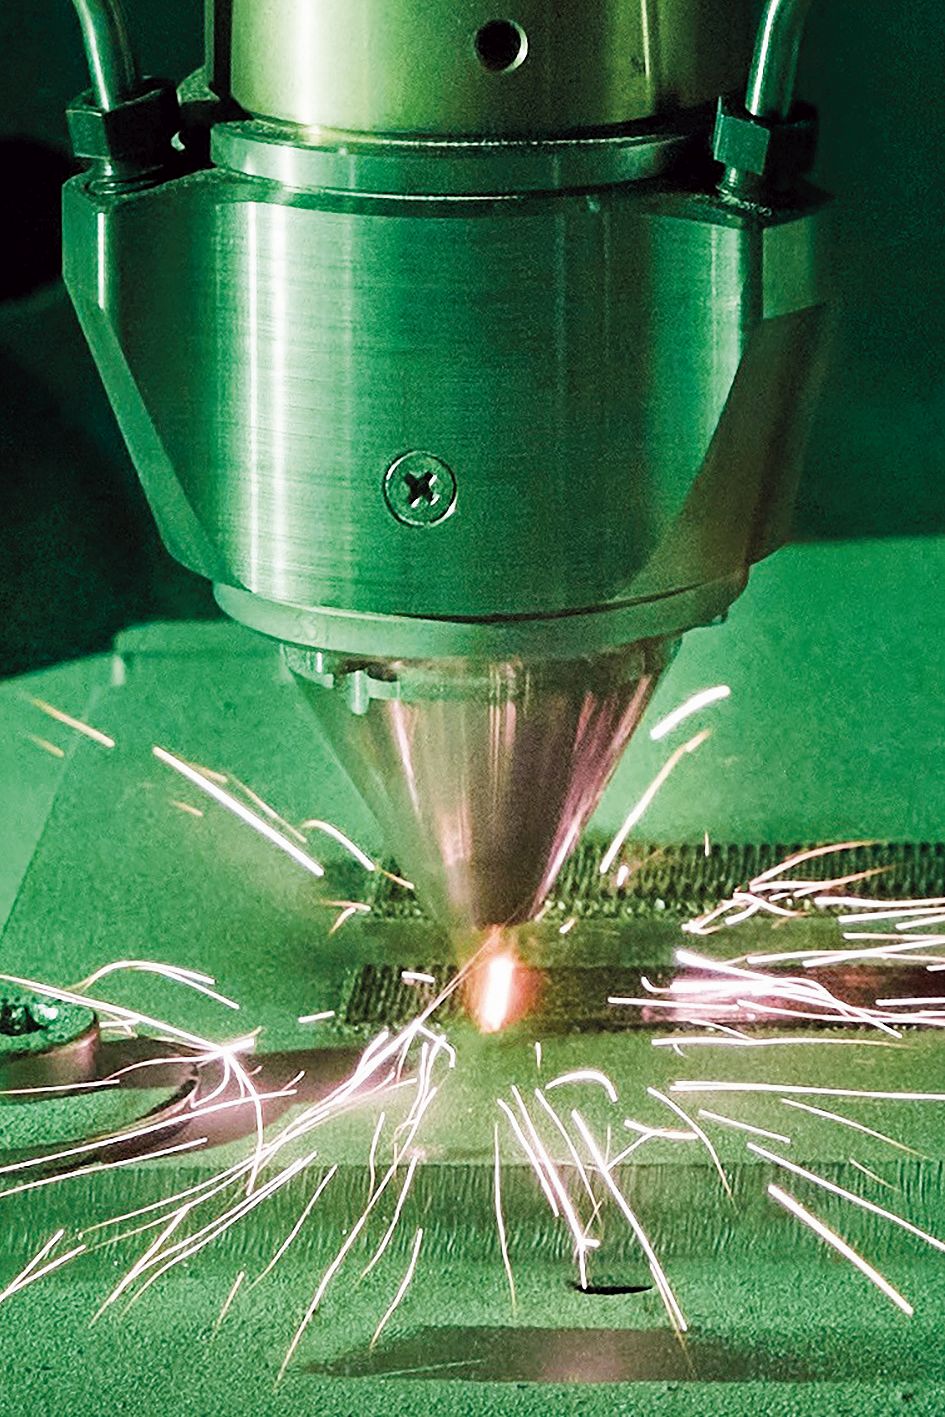 3D metal printing in record time: The CNC machine modified for the EHLA process can move tools in a fast, highly dynamic and precise manner in a lateral direction. With a rotary and tilting table, it is suitable not only for additive manufacturing, but also for free-form surface coatings.